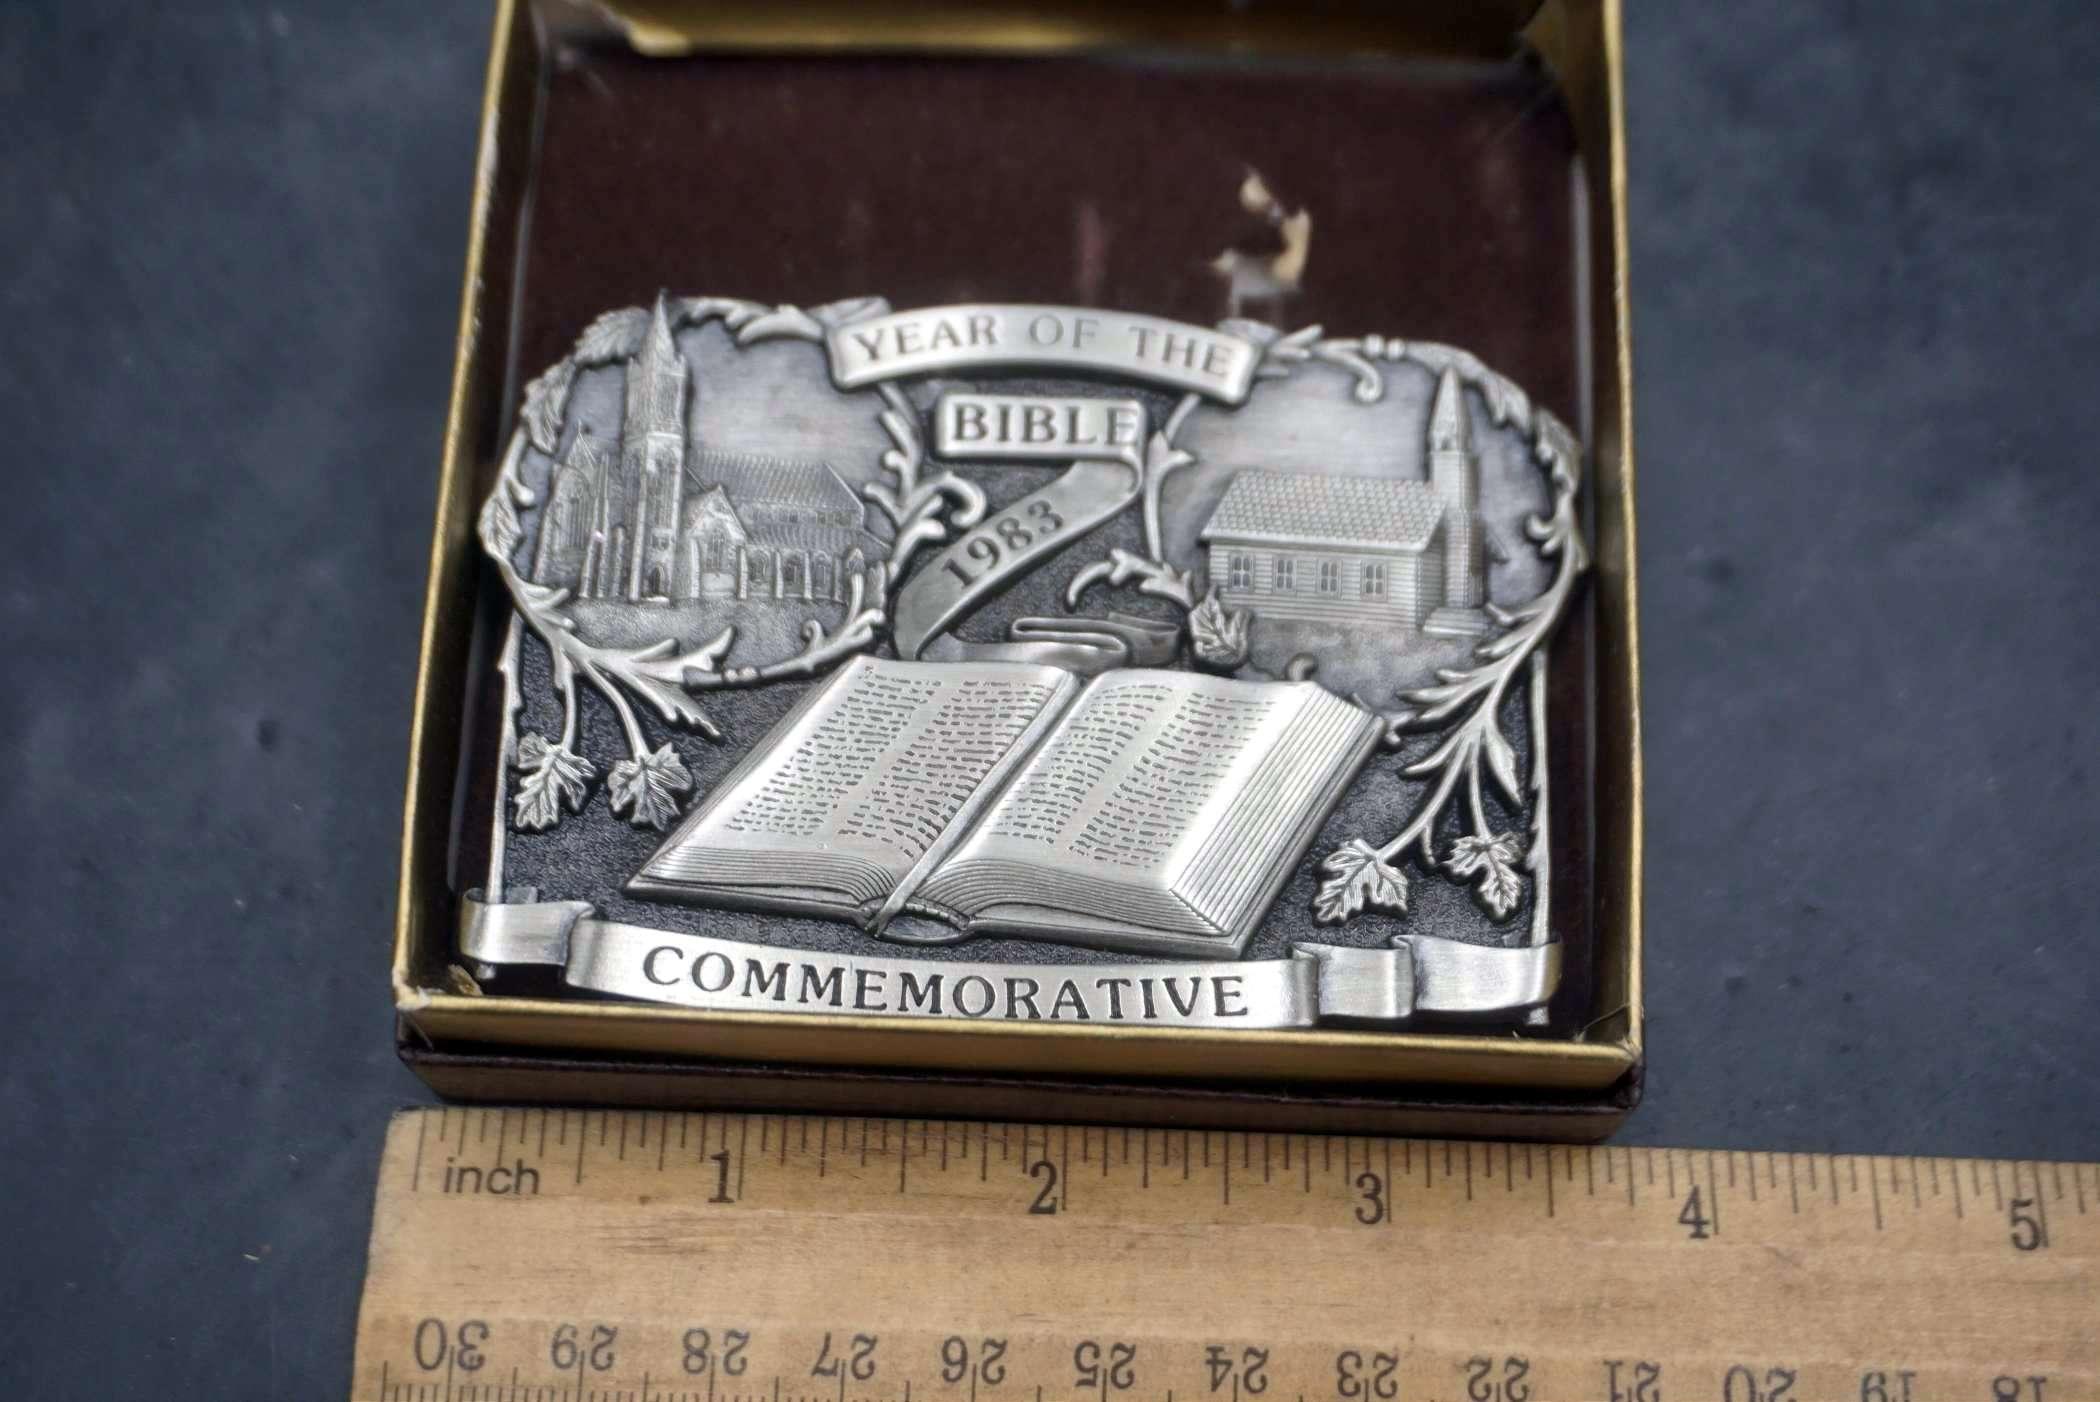 Year Of The Bible 1983 Commemorative Belt Buckle